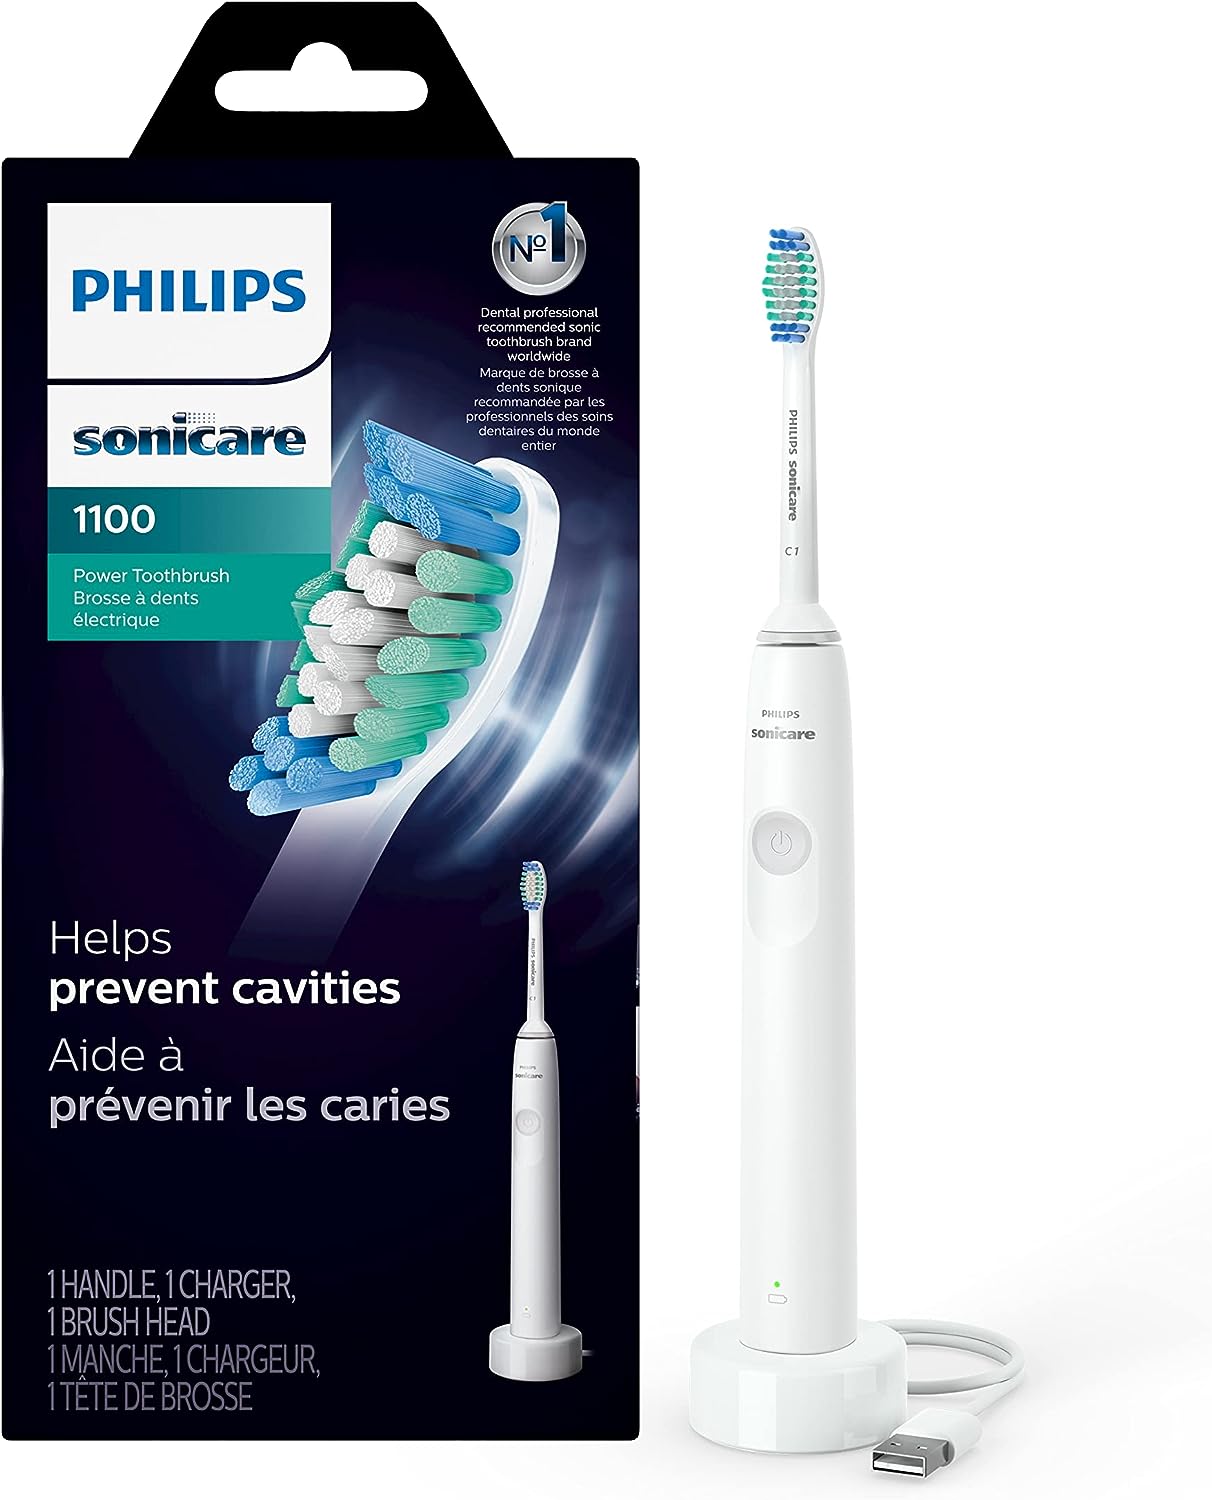 $19.96: PHILIPS Sonicare 1100 Rechargeable Electric Toothbrush (White Grey, HX3641/02) @ Amazon